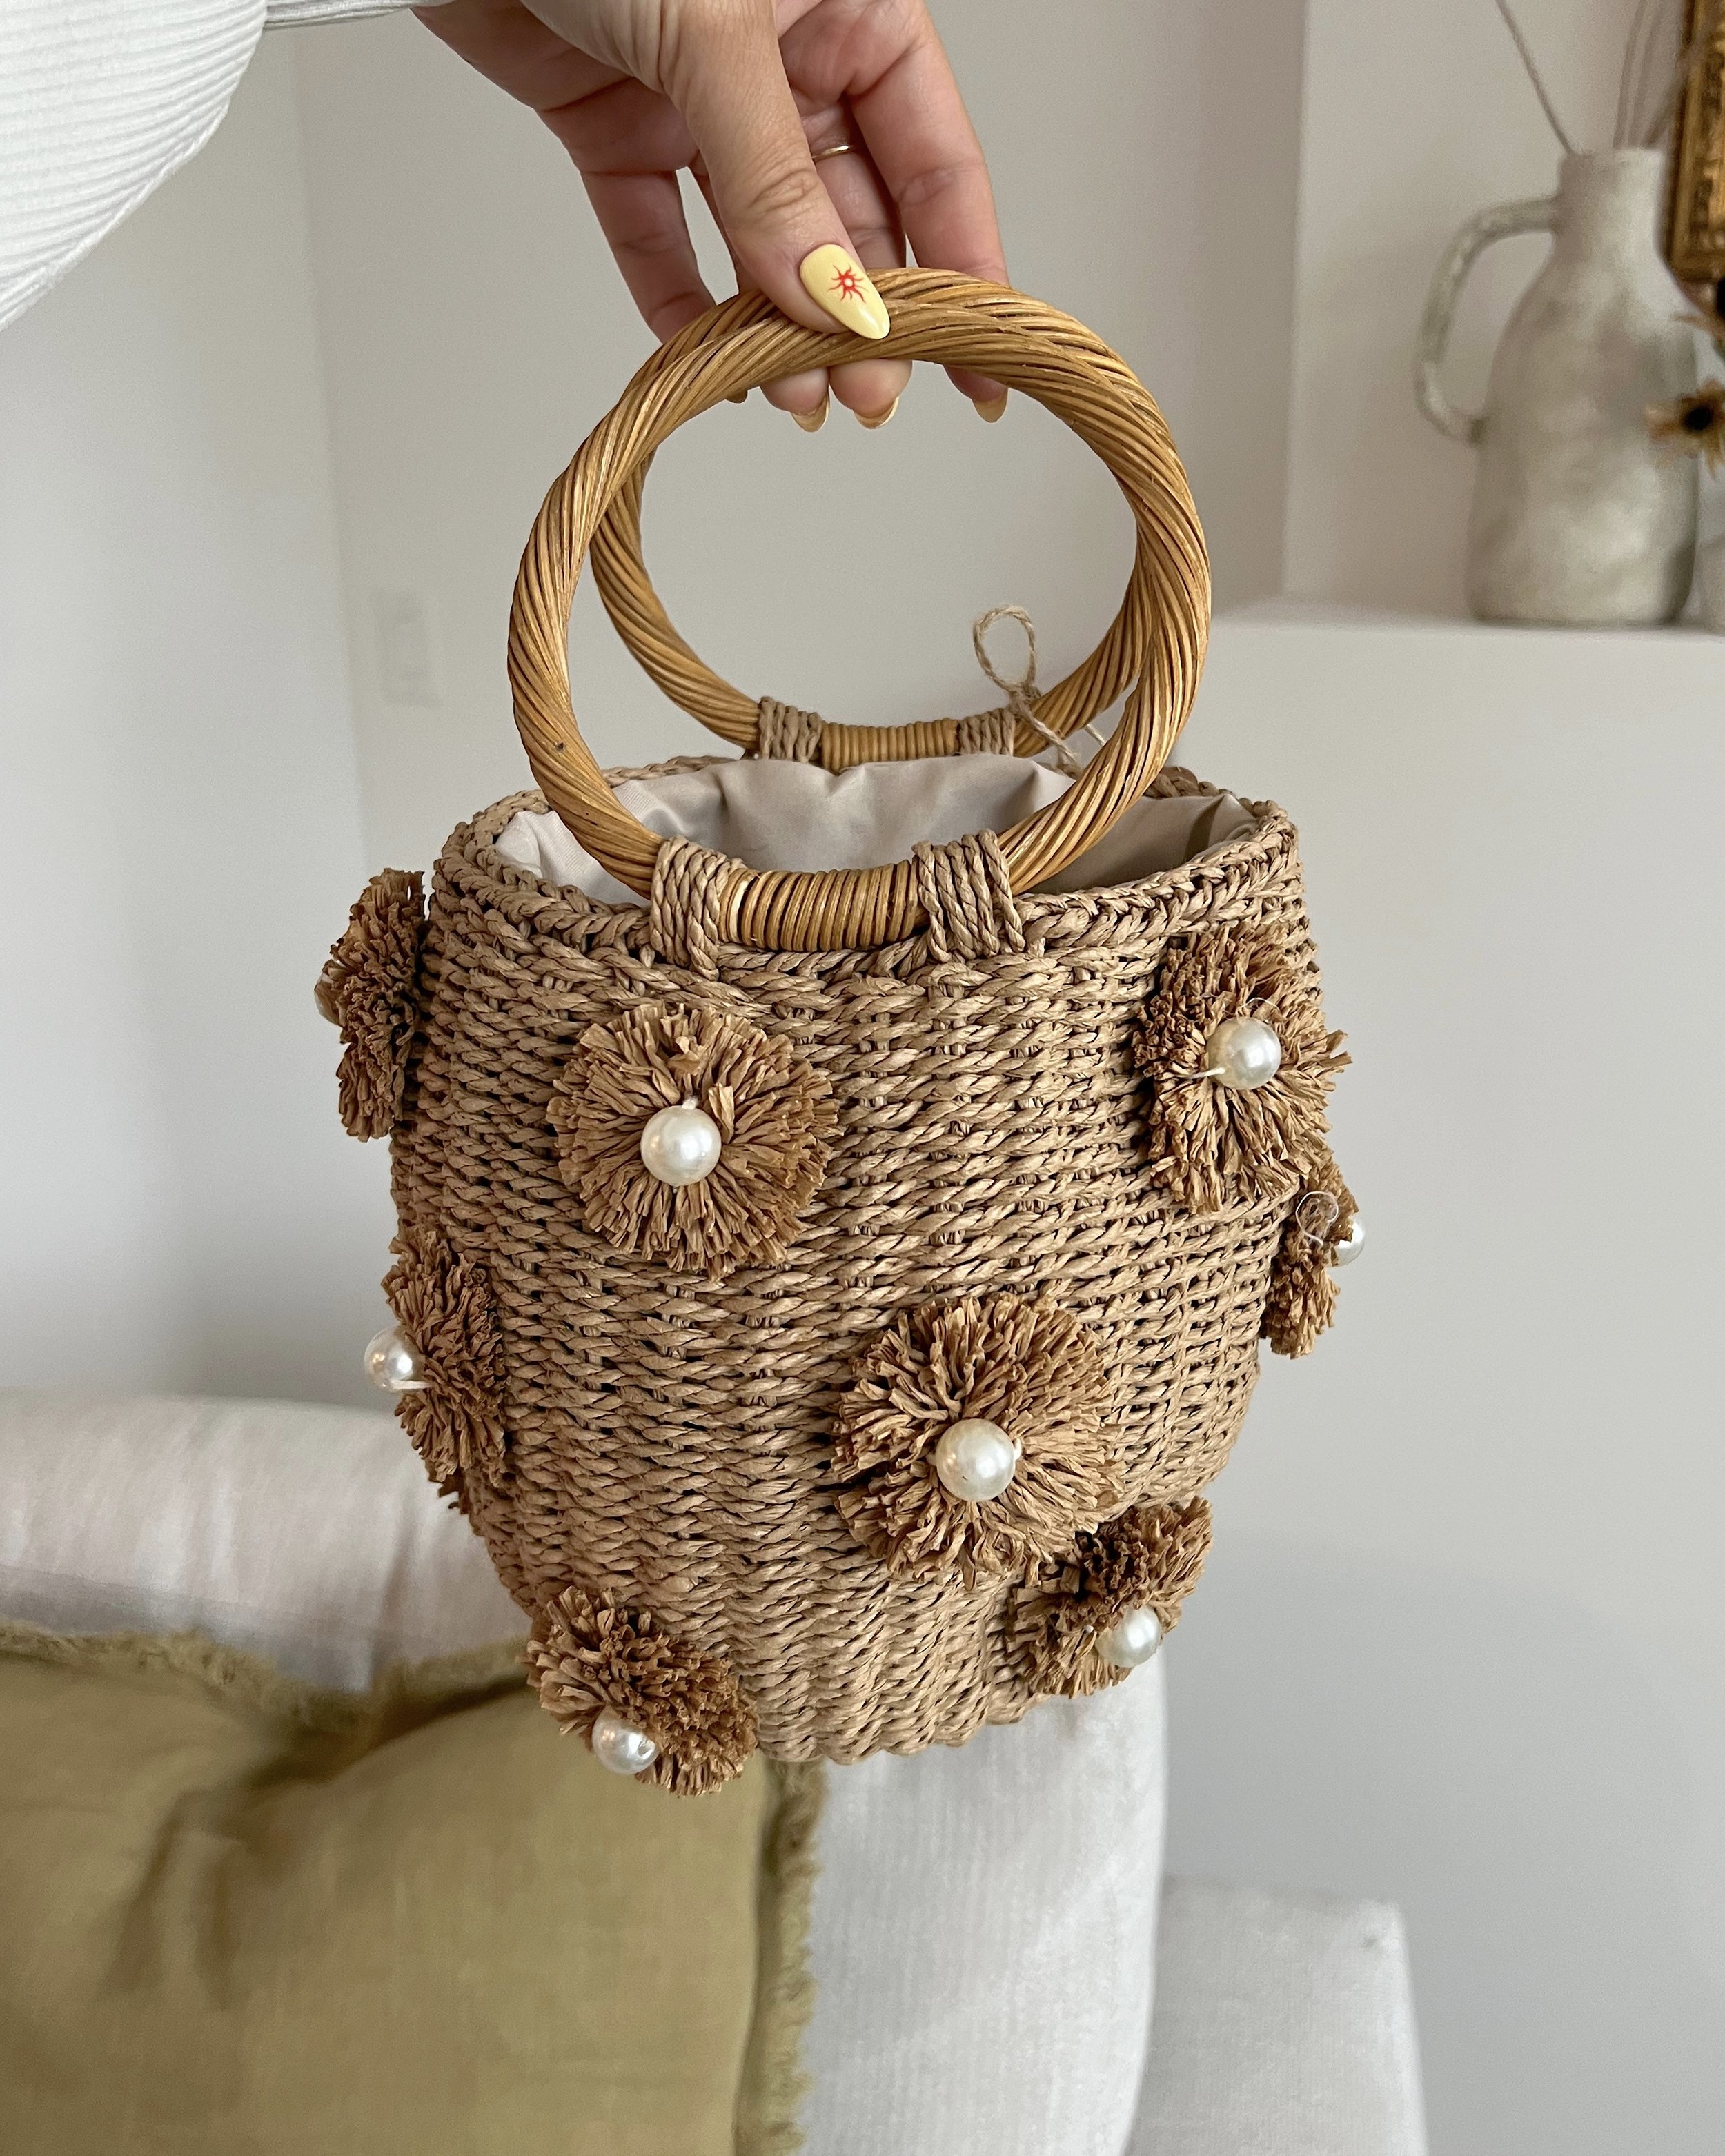 Amazon Bags Perfect For Summer - Rattan and pearl amazon bag, under $40, bre sheppard, summer style.jpg